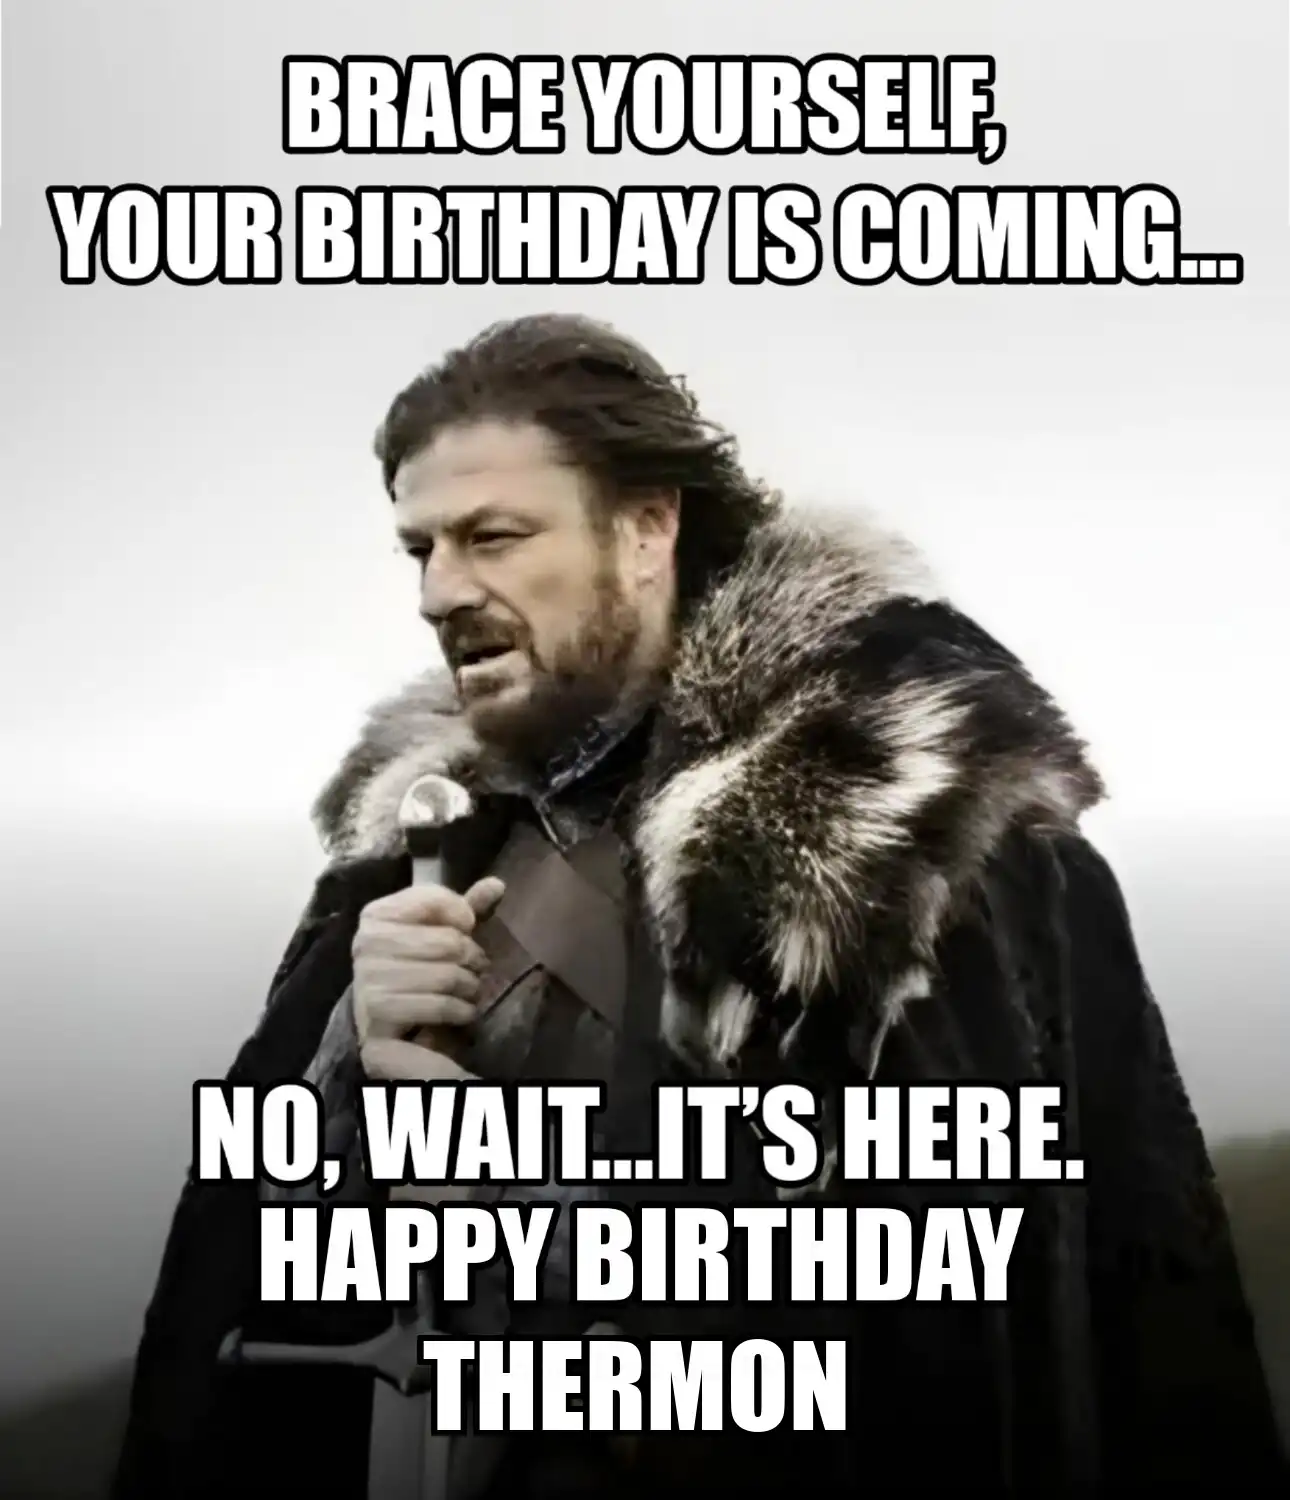 Happy Birthday Thermon Brace Yourself Your Birthday Is Coming Meme